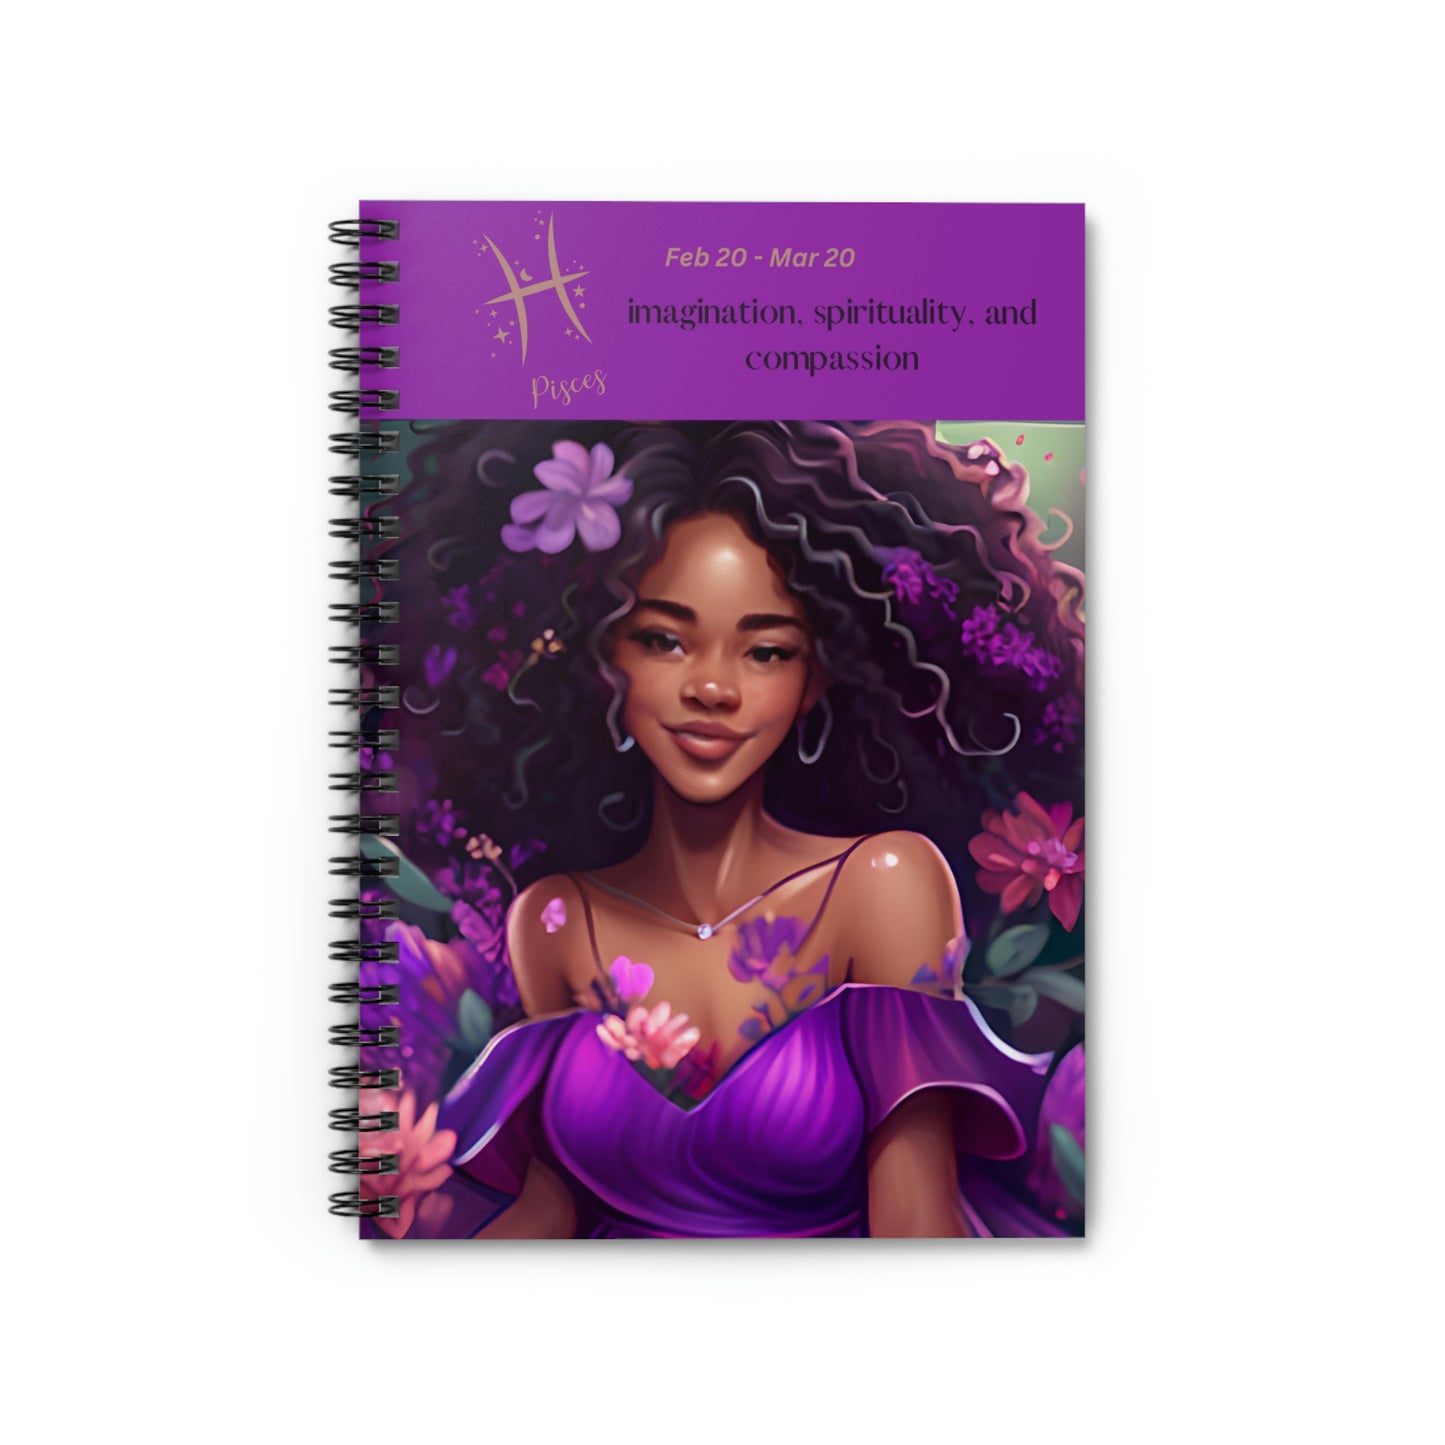 Astrology Collection (Pisces) - AA Culture Journal - Ruled Line